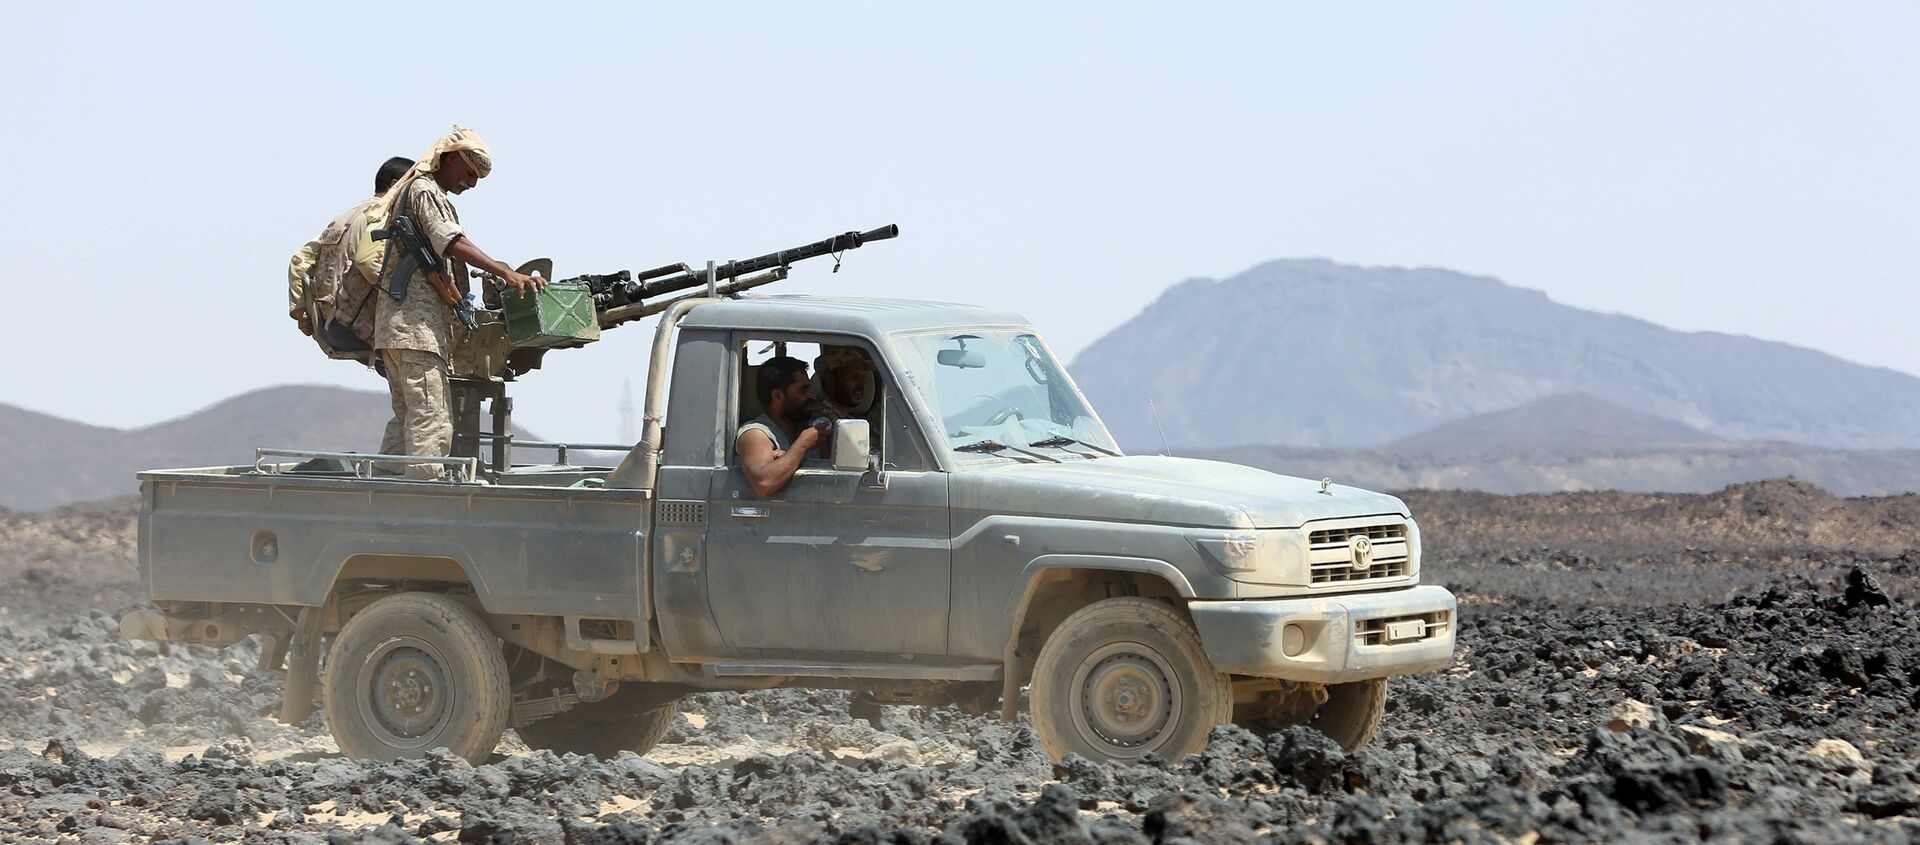 Soldiers loyal to Yemen's government ride on a pickup truck in the frontline province of Marib September 17, 2015.  - Sputnik Mundo, 1920, 10.02.2021